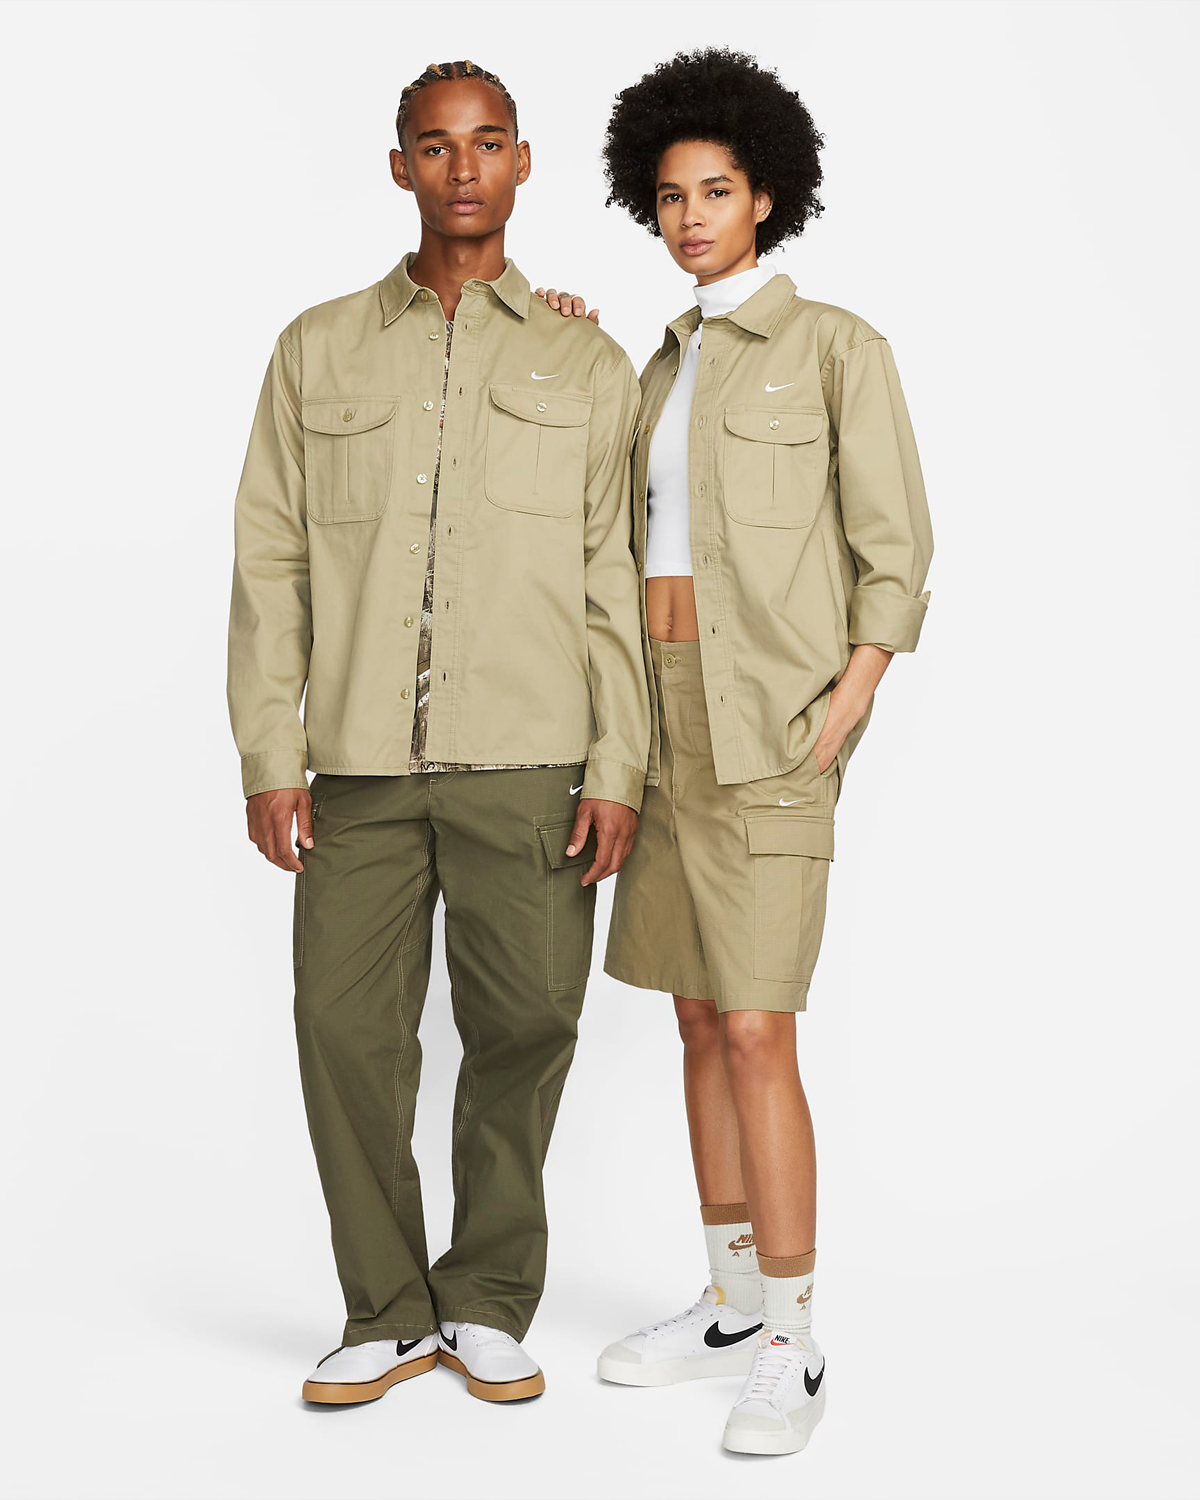 Nike-SB-Long-Sleeve-Button-Up-Top-Neutral-Olive-Outfit